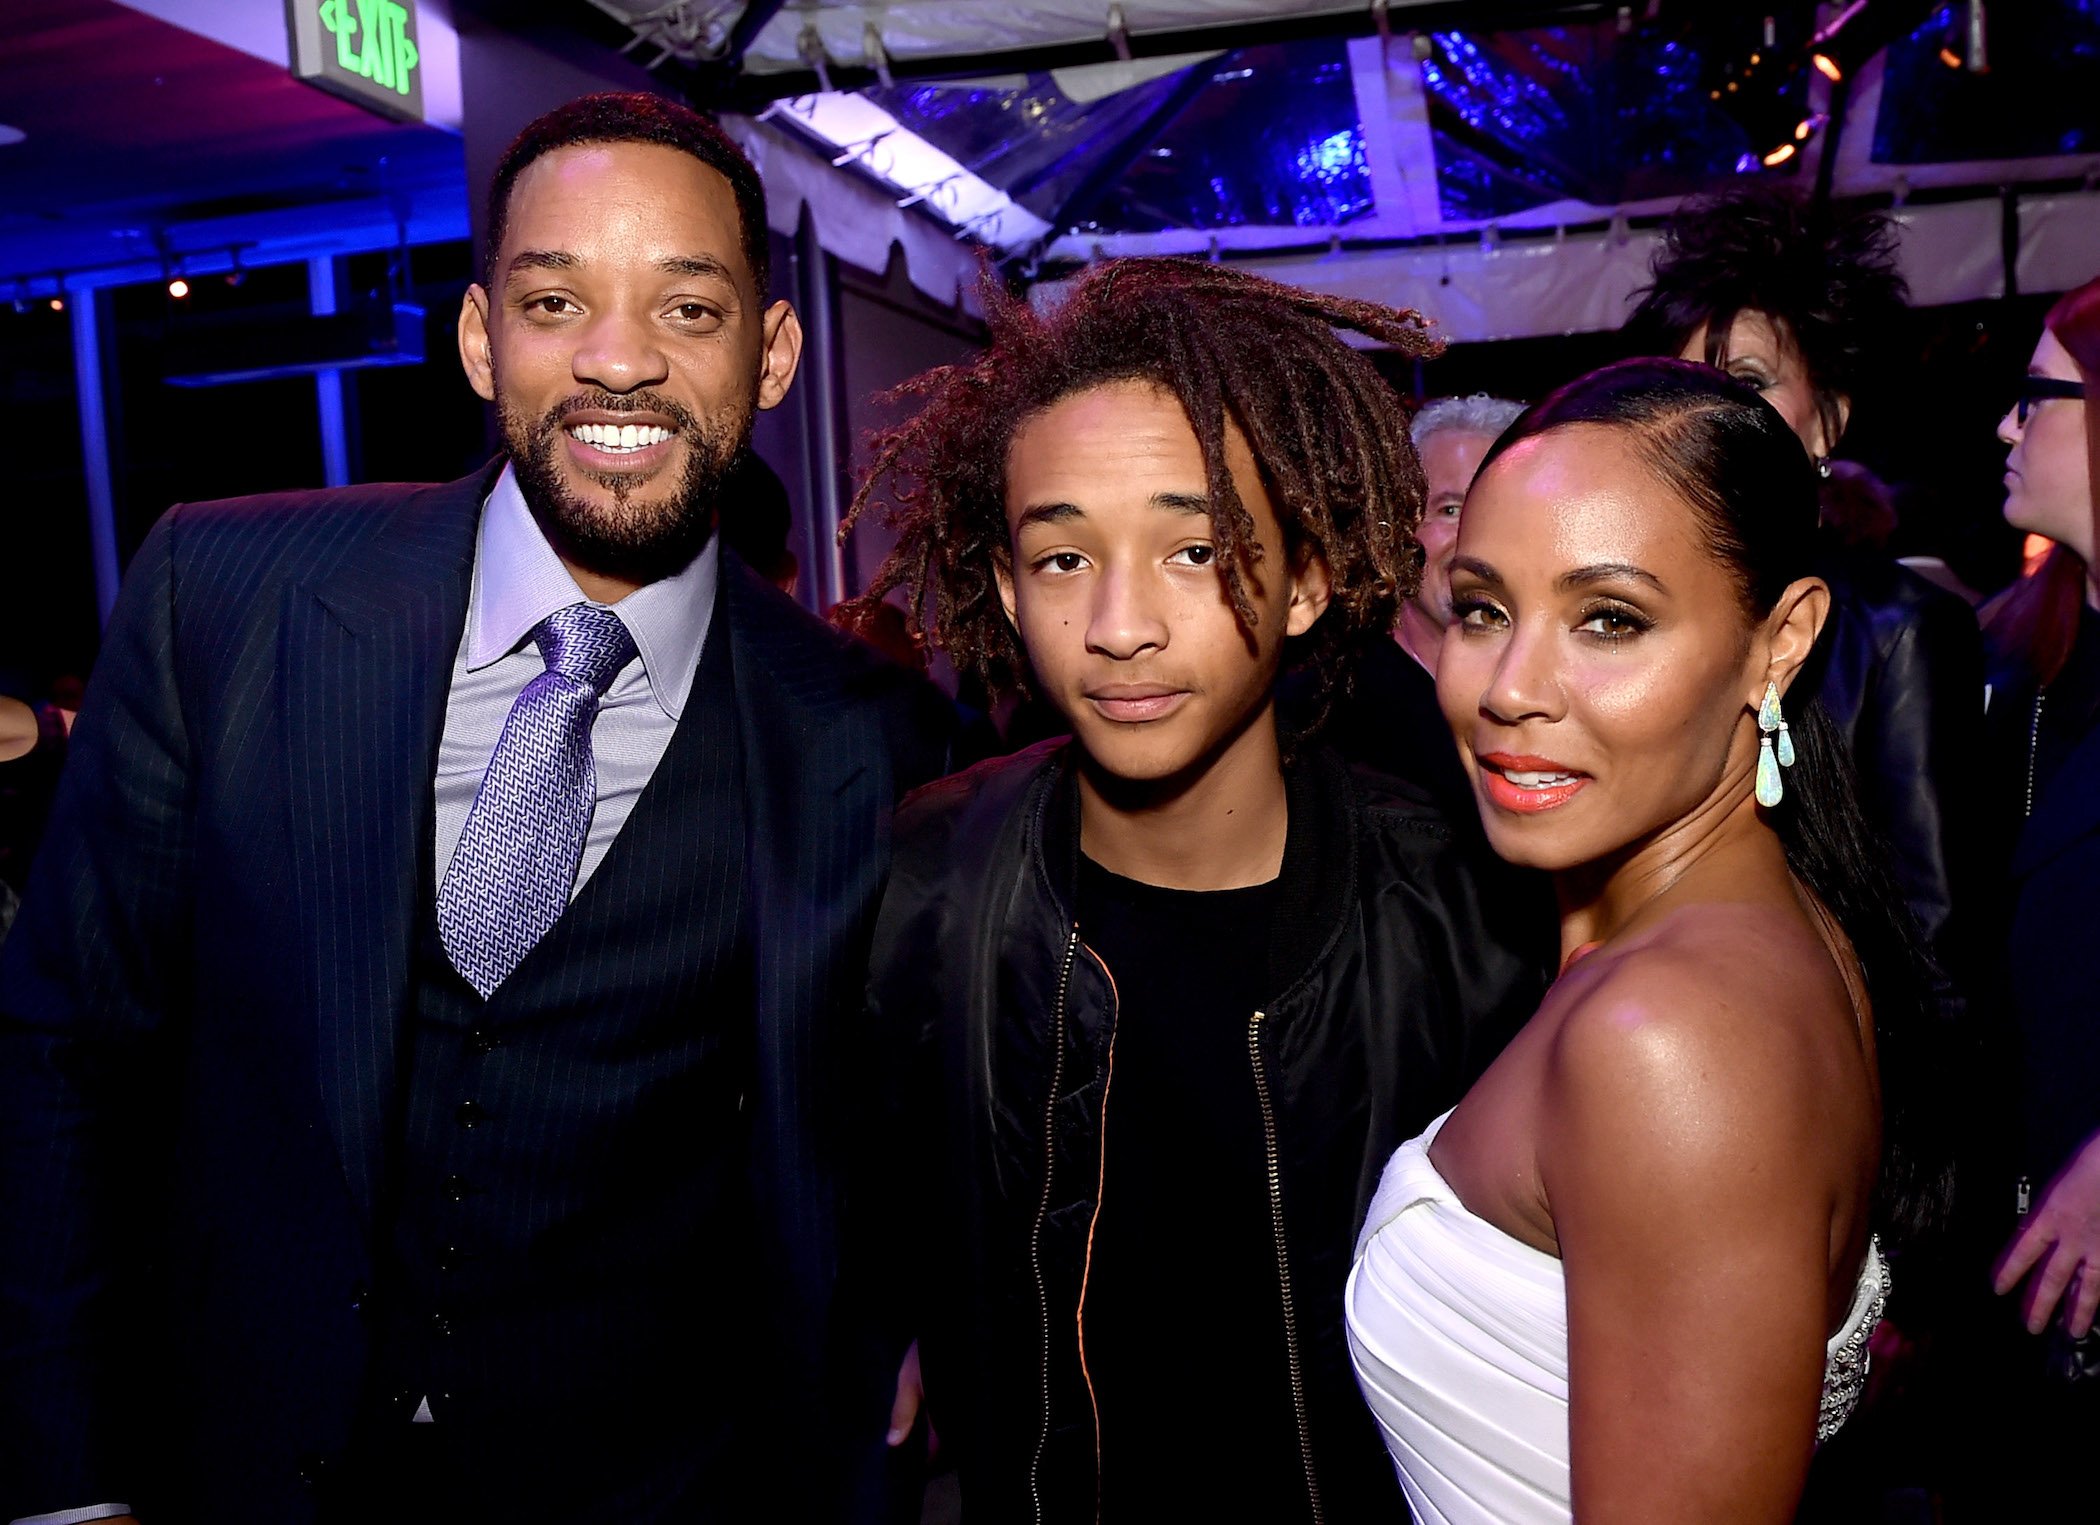 Will Smith, Jaden Smith, and Jada Pinkett Smith smiling at an event